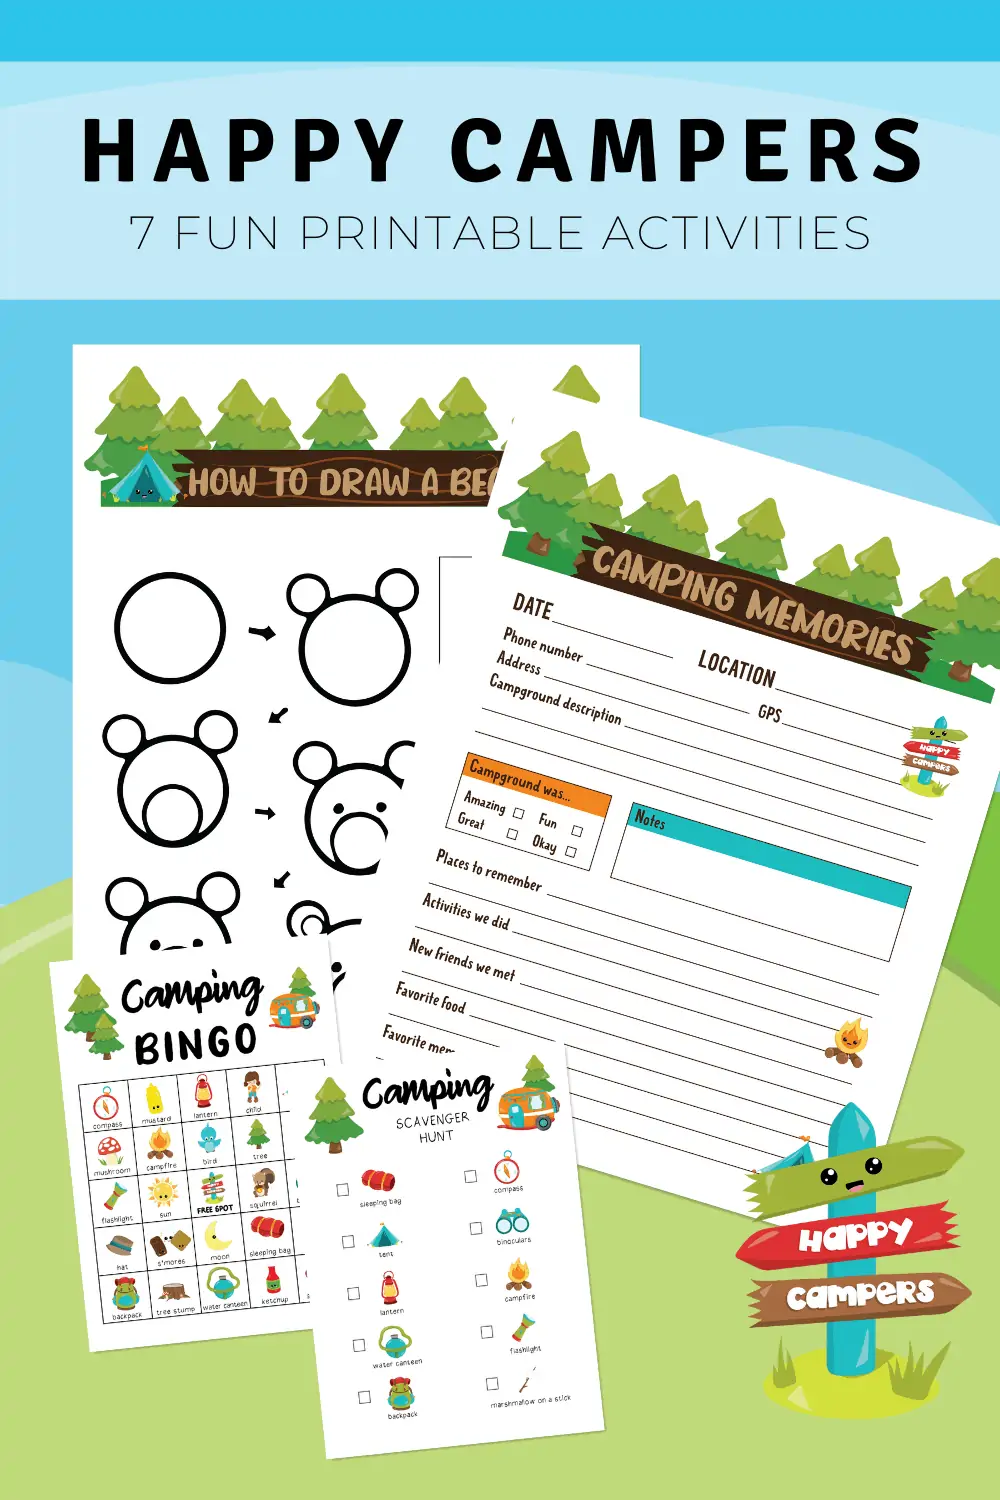 Happy Campers 7 Fun Printable Activities text with examples of fun activity printables with camping theme for kids